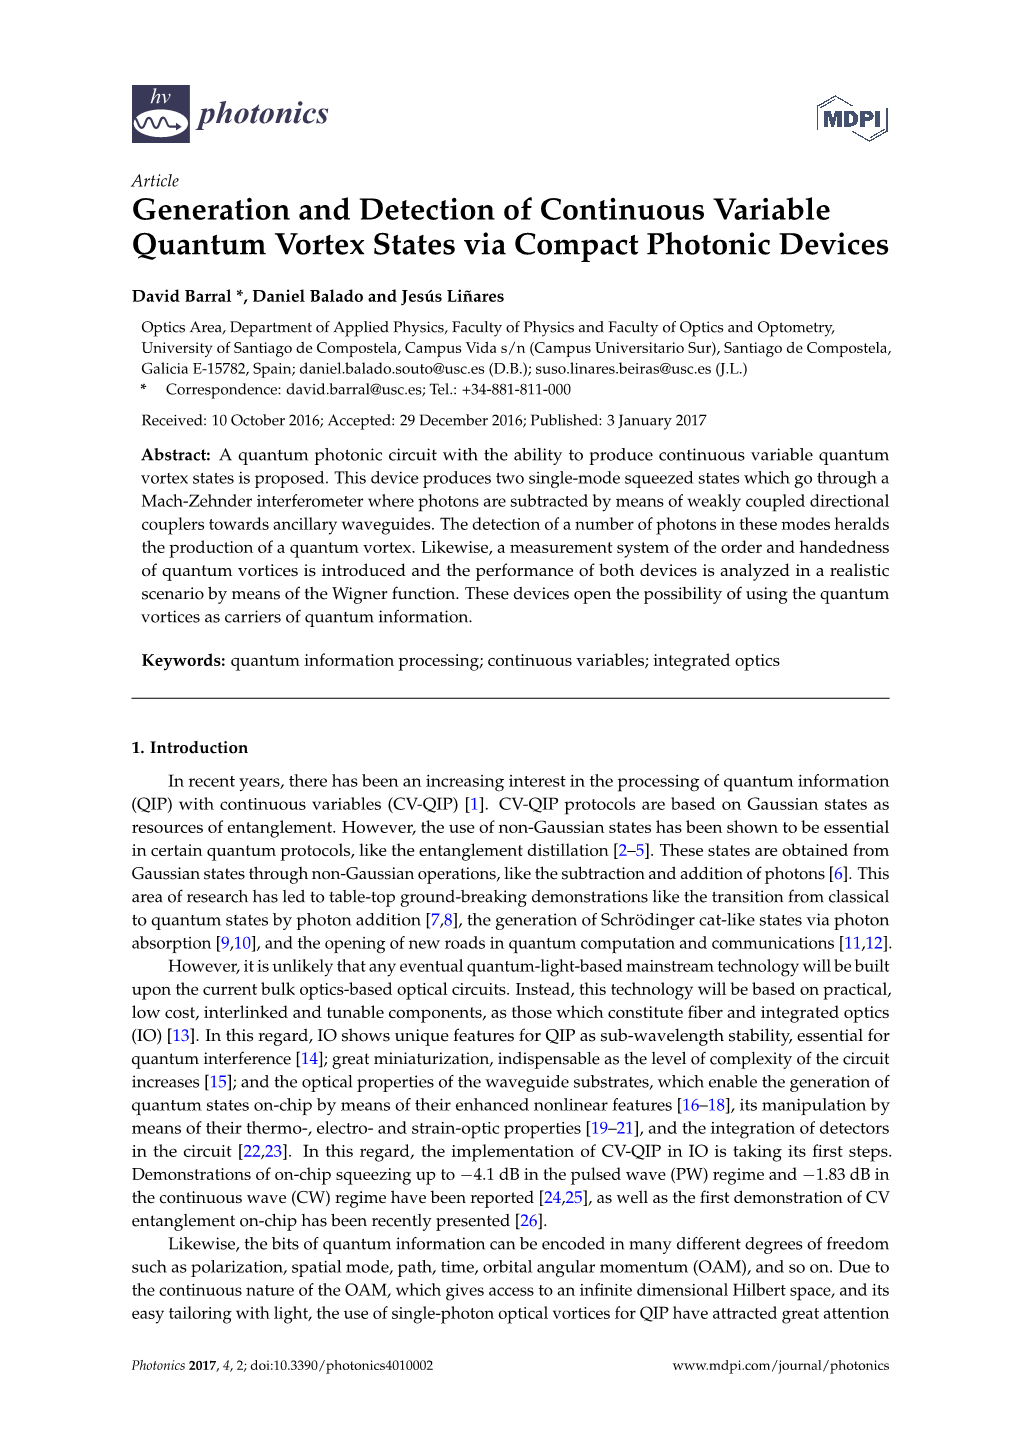 Generation and Detection of Continuous Variable Quantum Vortex States Via Compact Photonic Devices